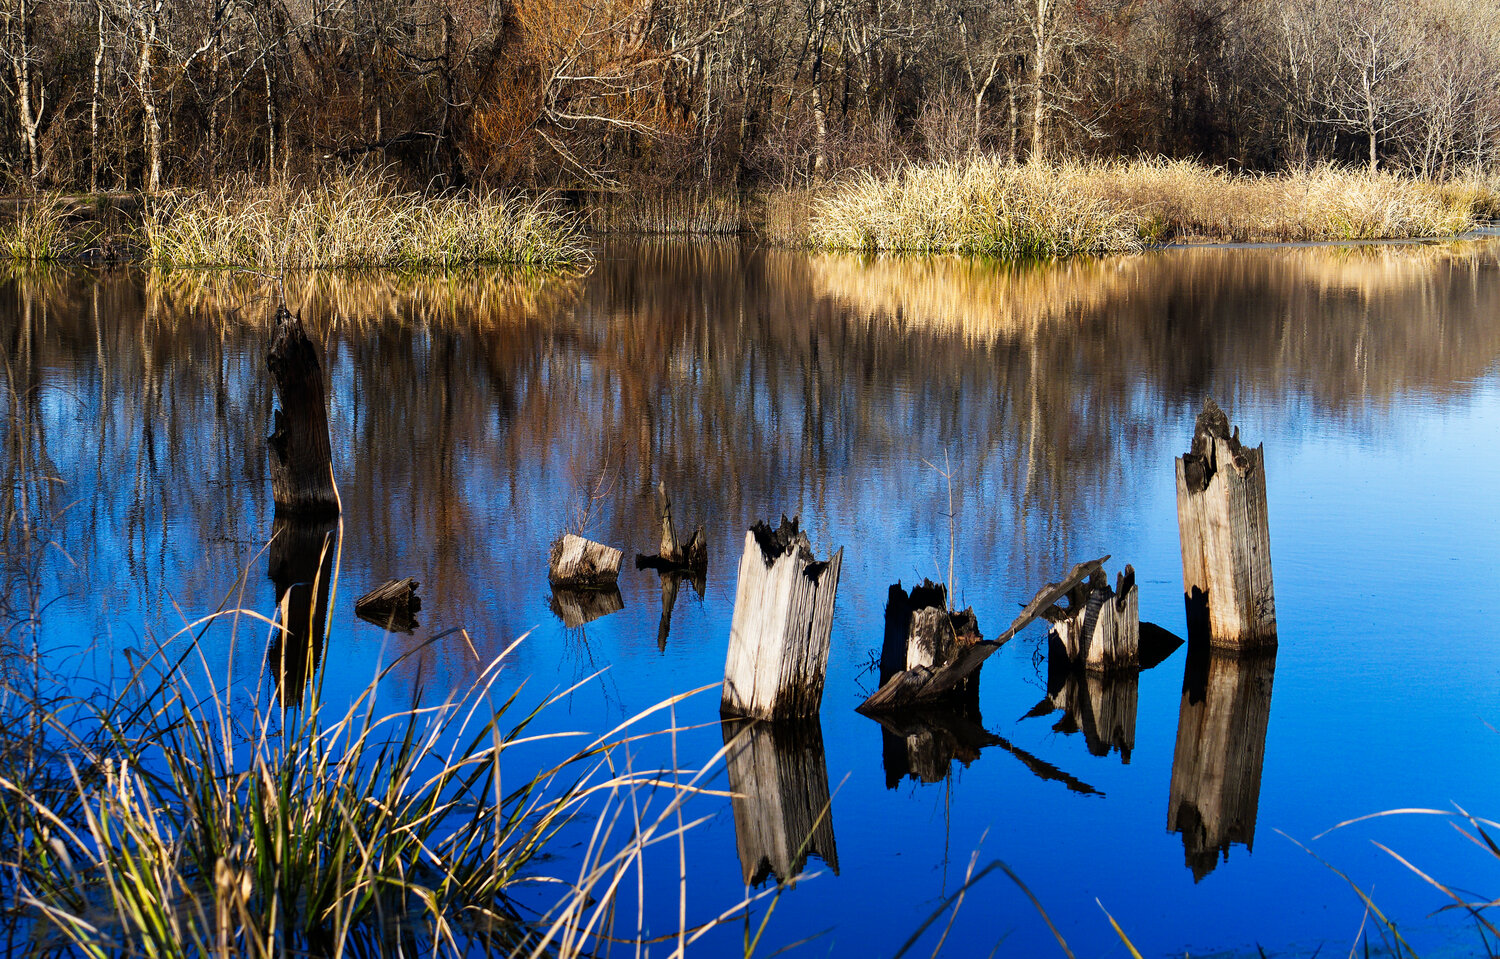 Remnants of the old railroad bridge are reflected in a pond at the Mineola Nature Preserve.